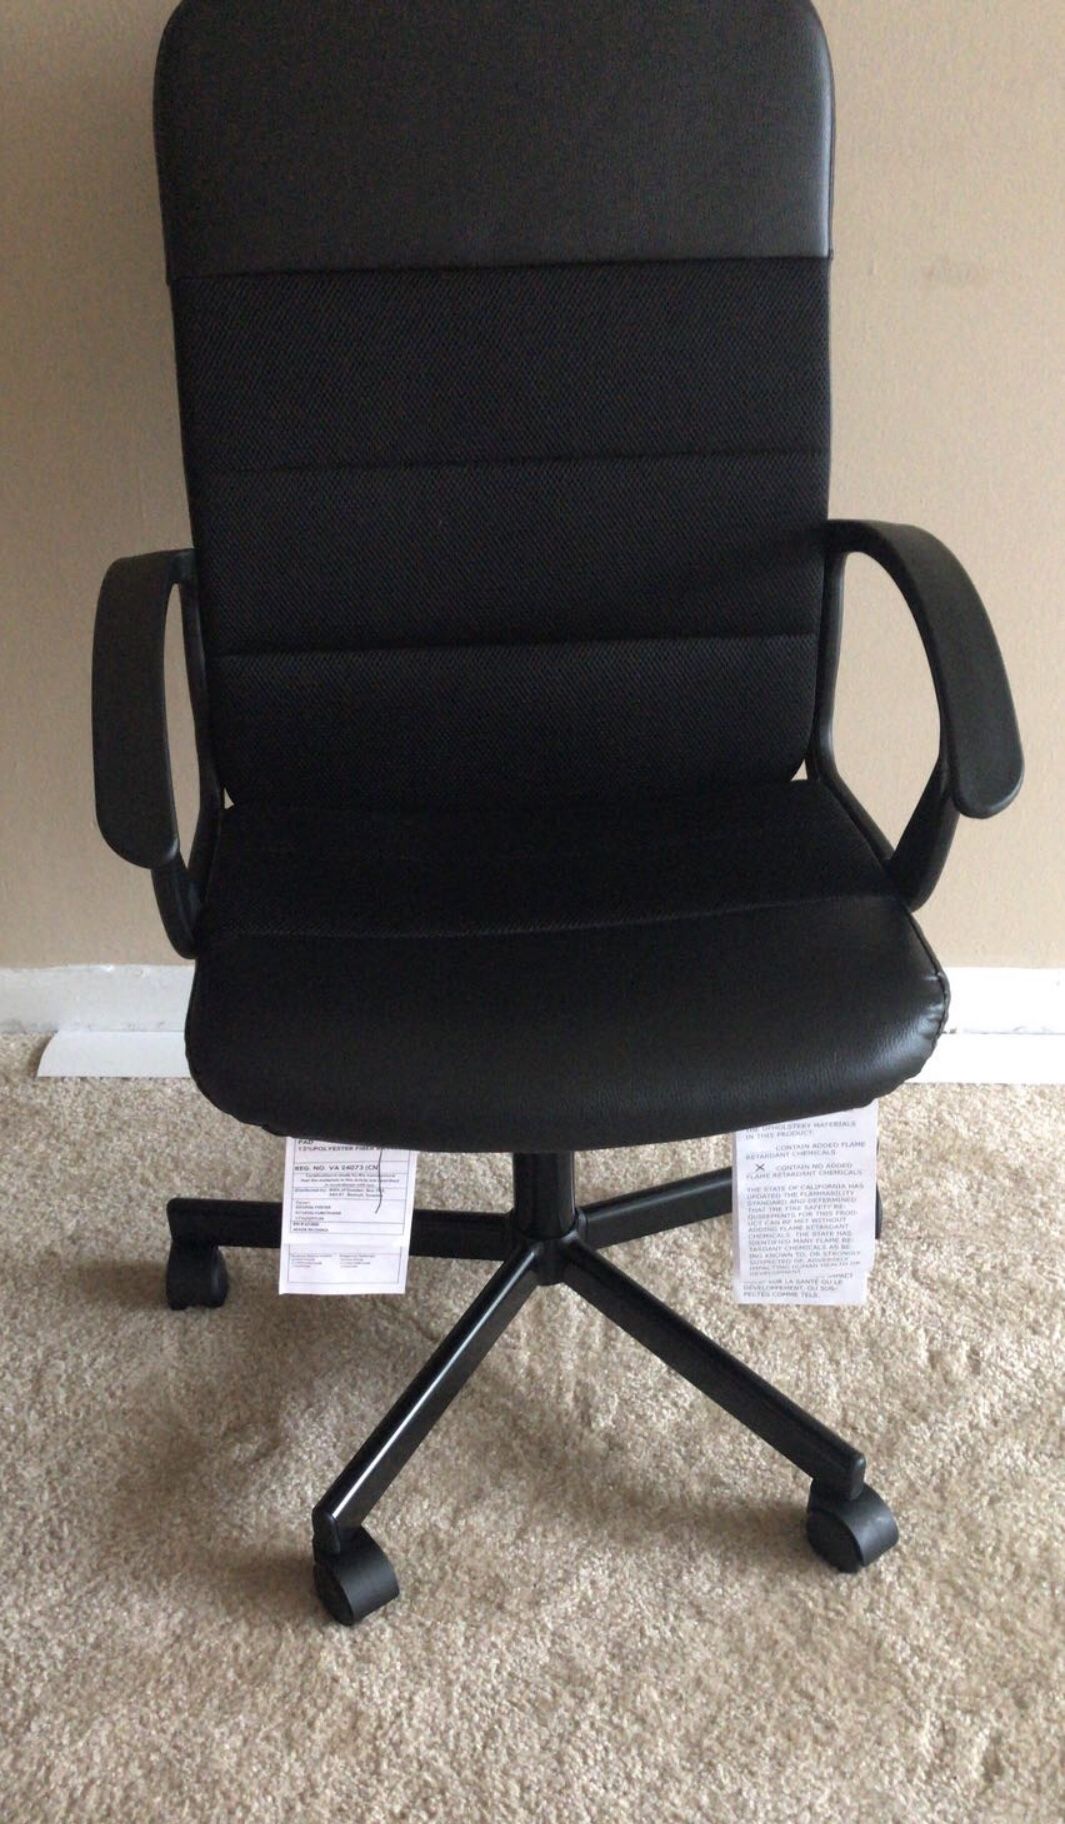 Computer desk and chair for sale